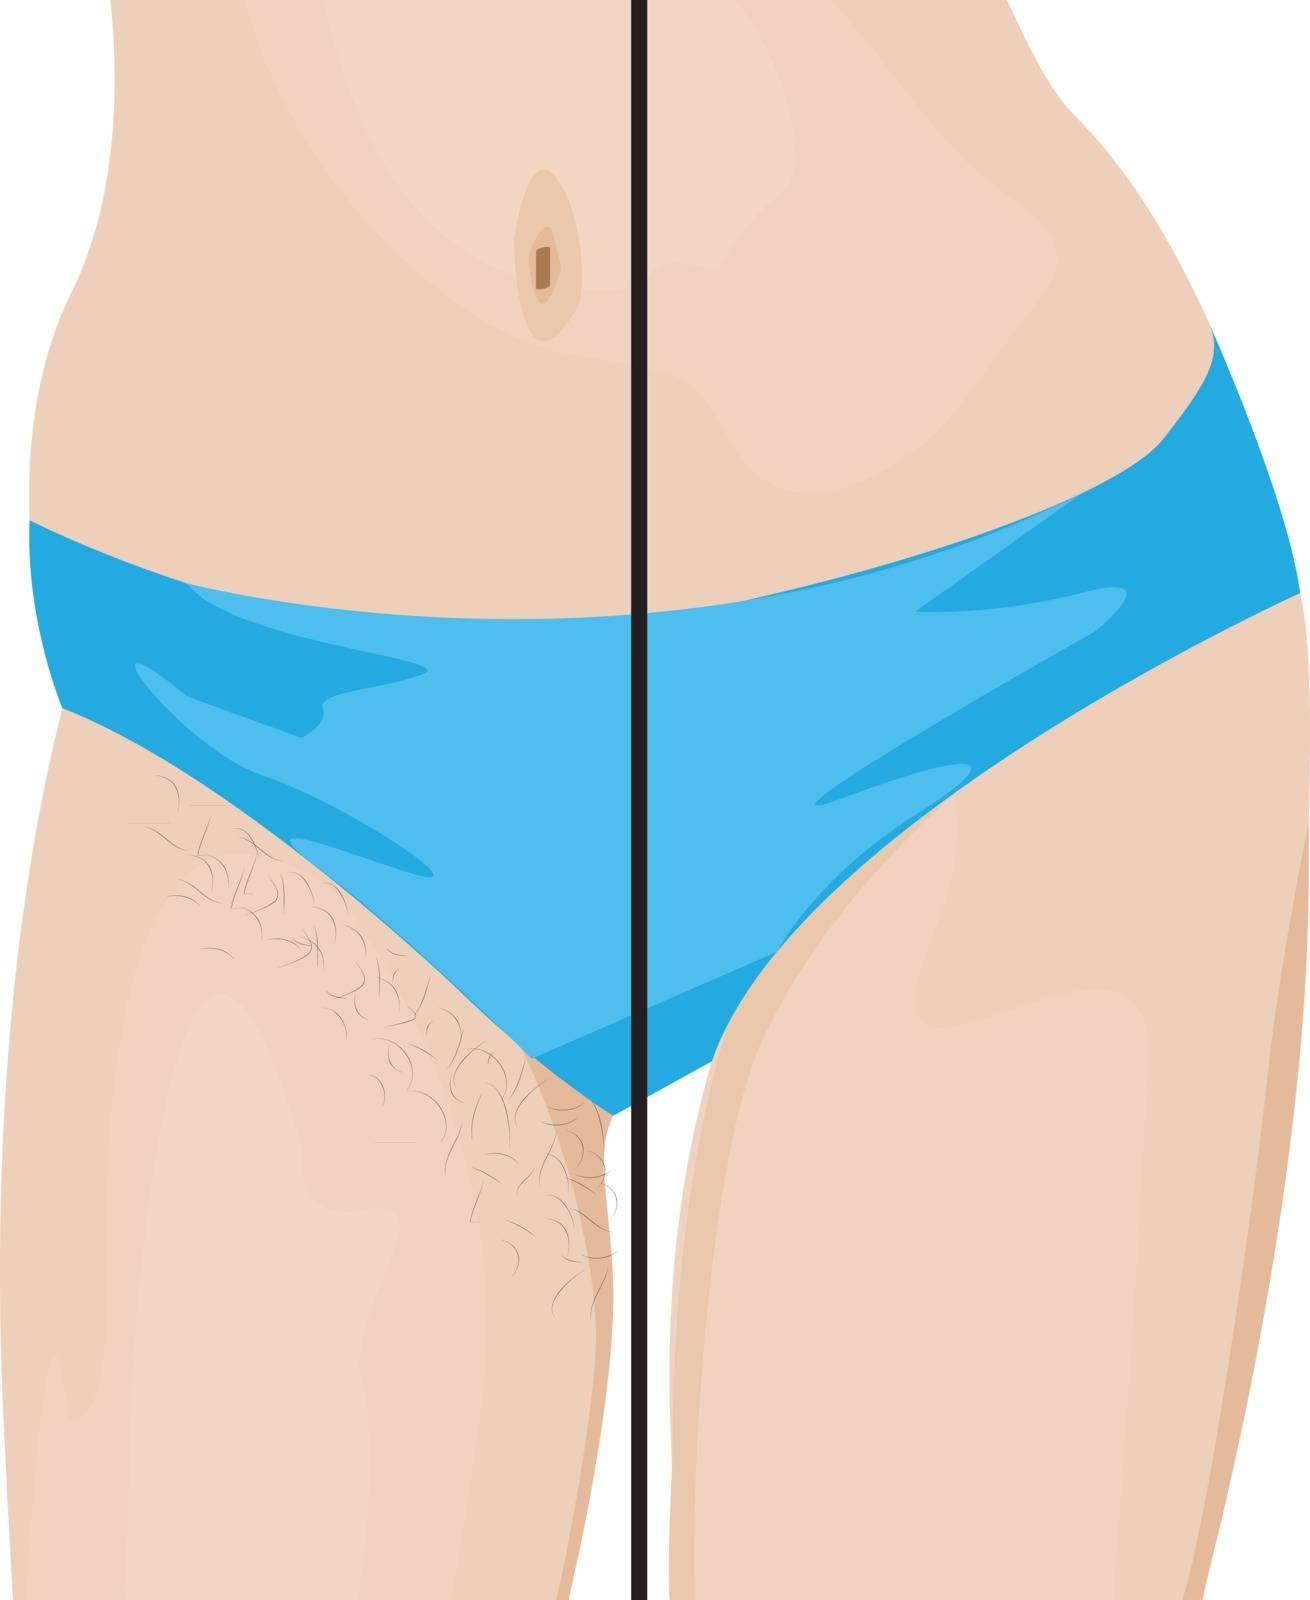 Hair removal results before and after depilation procedure vector illustration